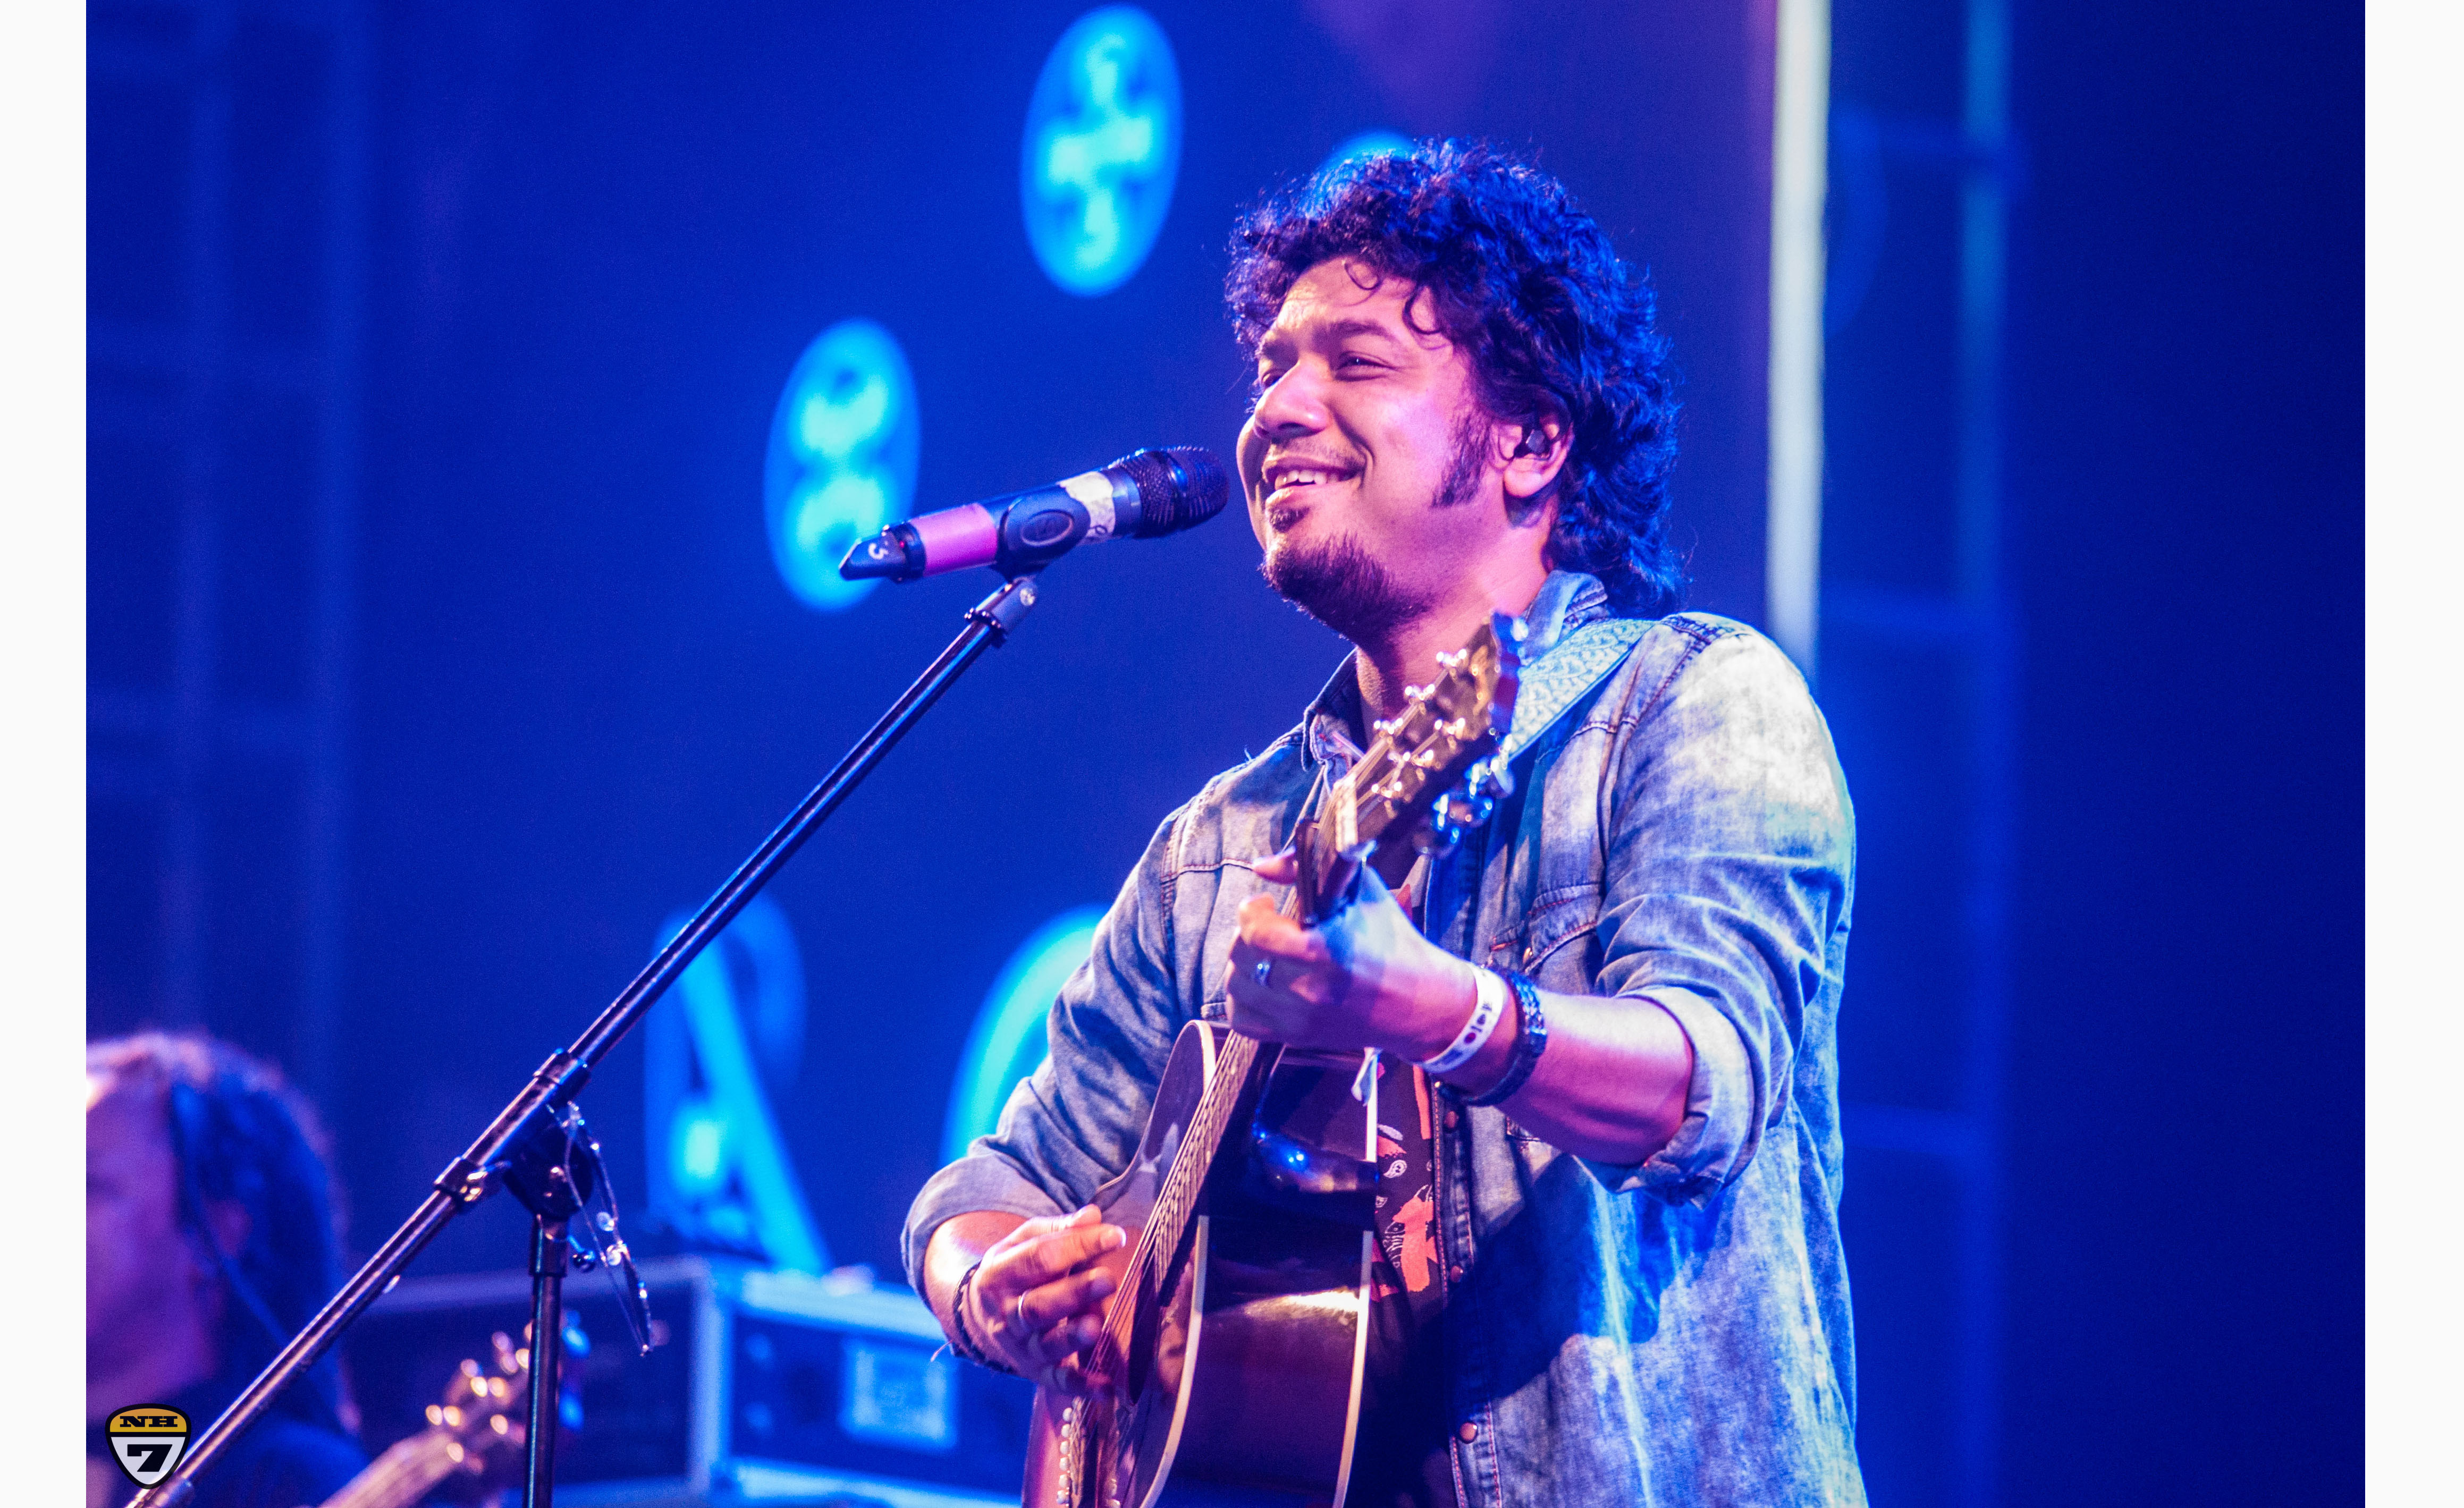  Papon performance on Day 2 of Bacardi NH7 Weekender Pune. Photo Credit - Chuck